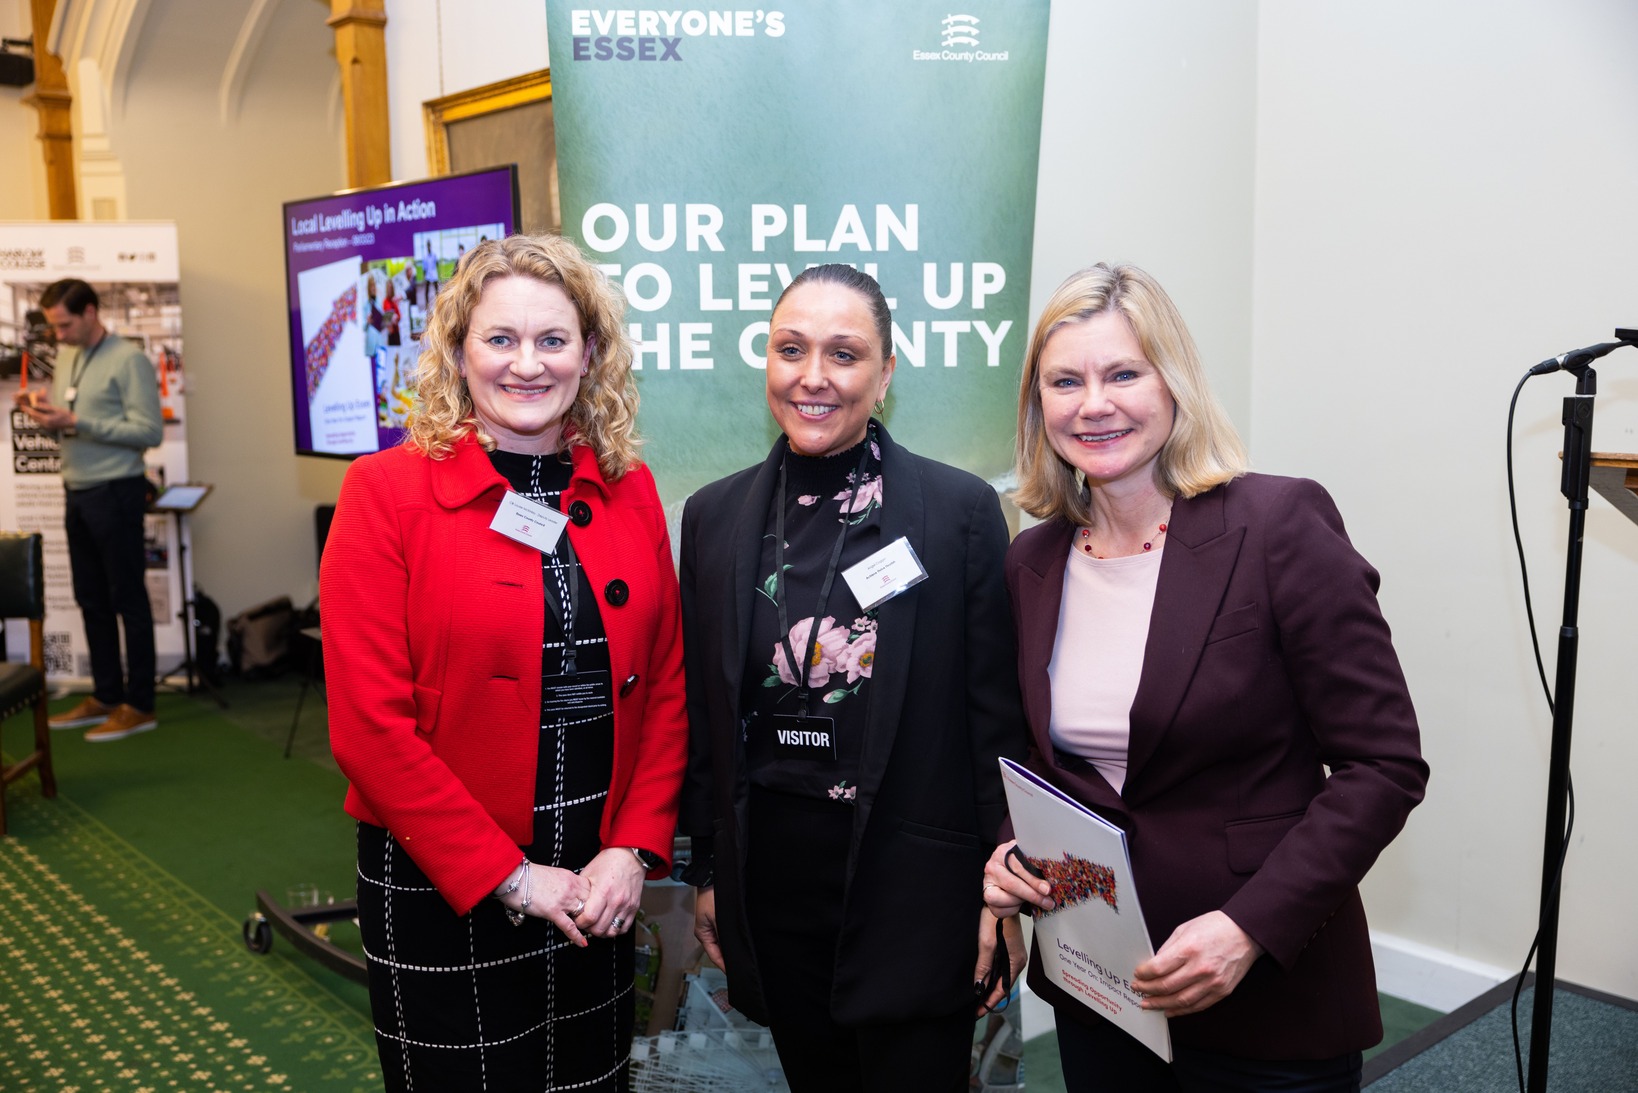 Cllr Louise McKinlay, Angel Cogger and Justine Greening